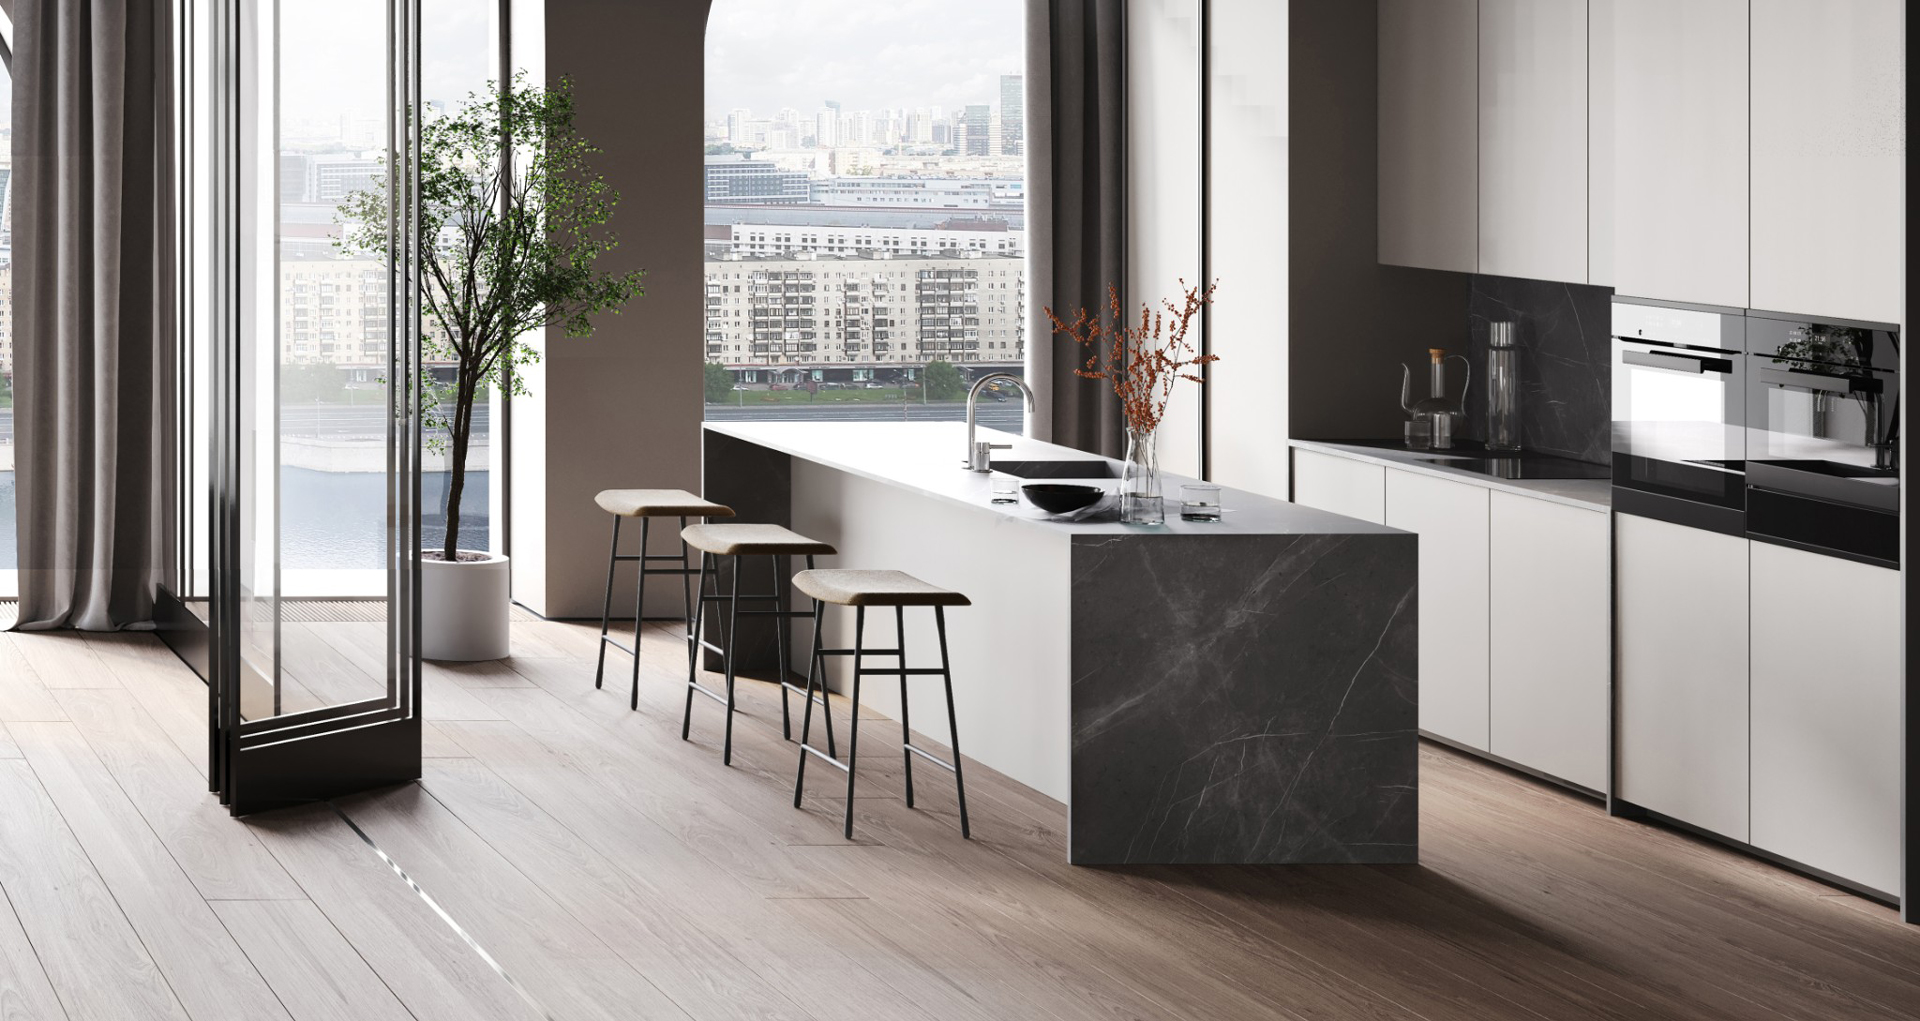 Individual solutions, perfect craftsmanship and unique kitchen design from SieMatic